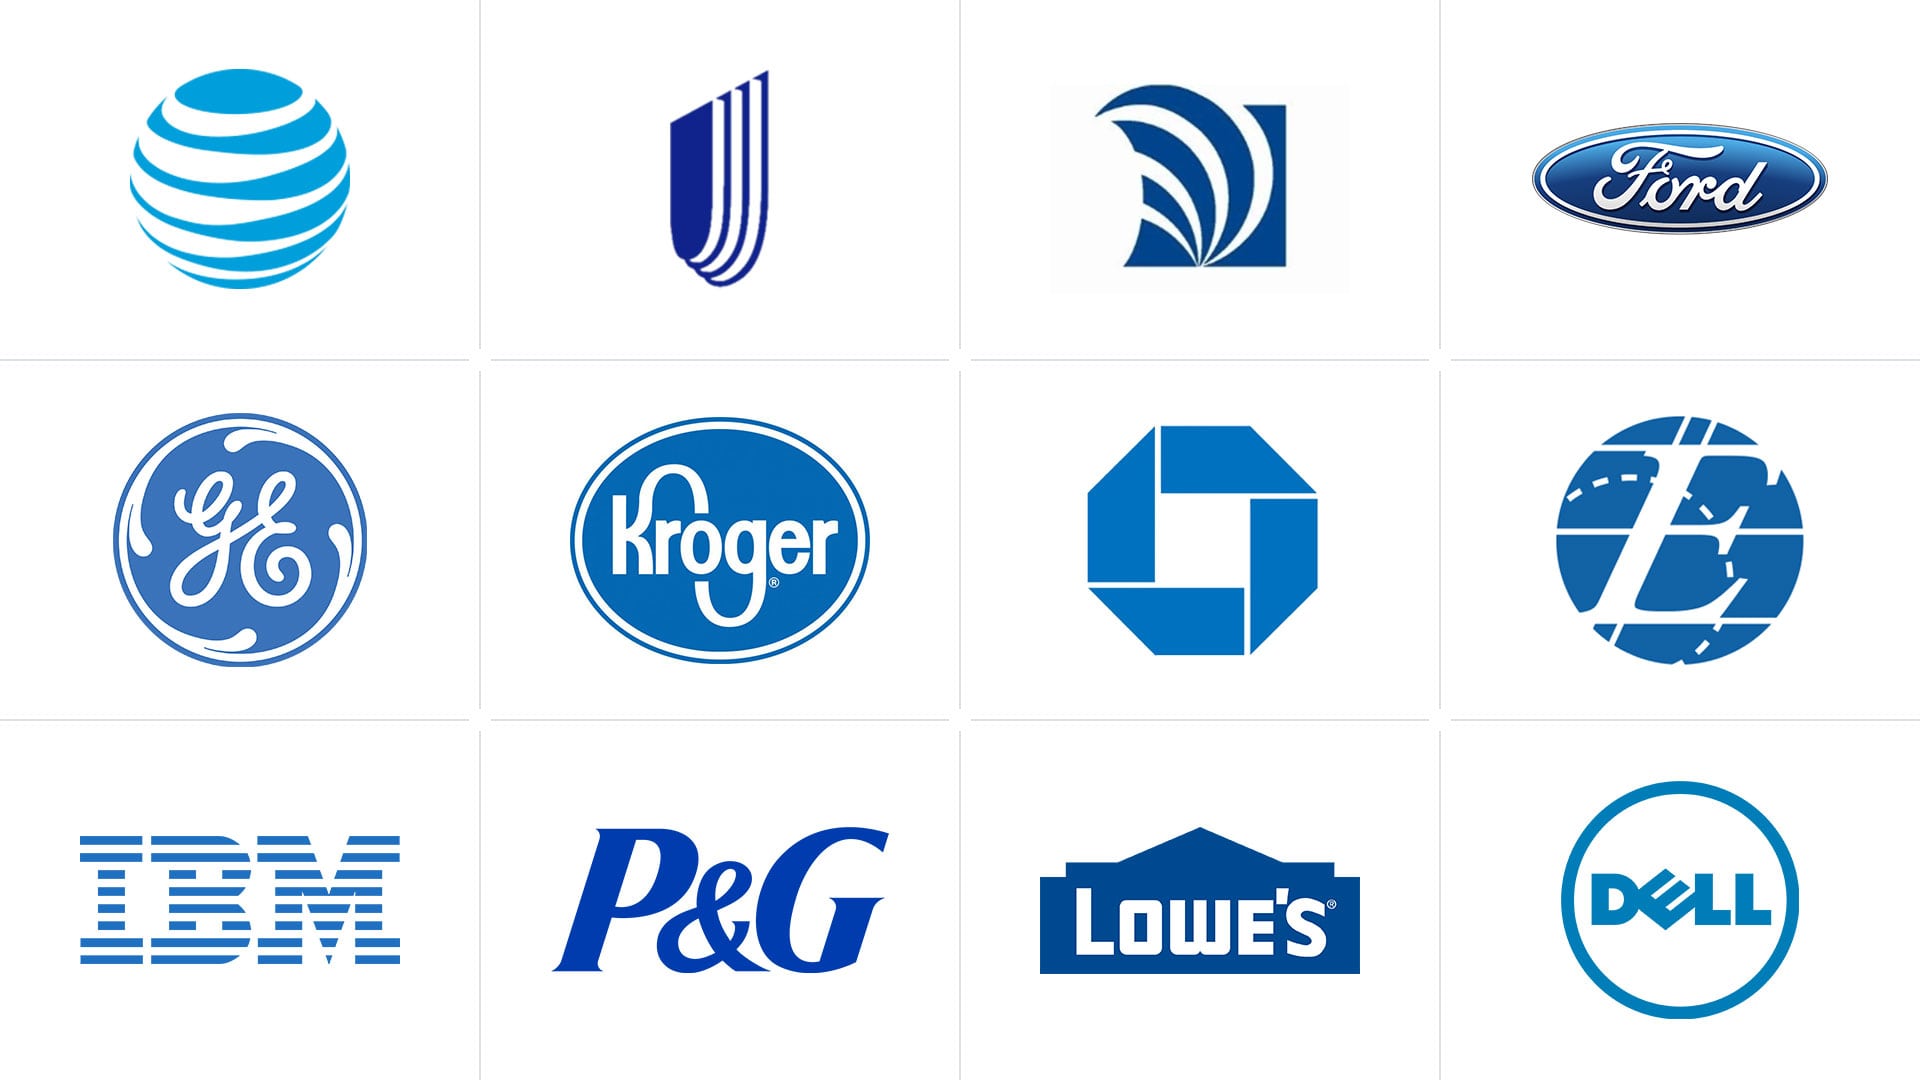 Blue Color Usage Examples in Popular Logos